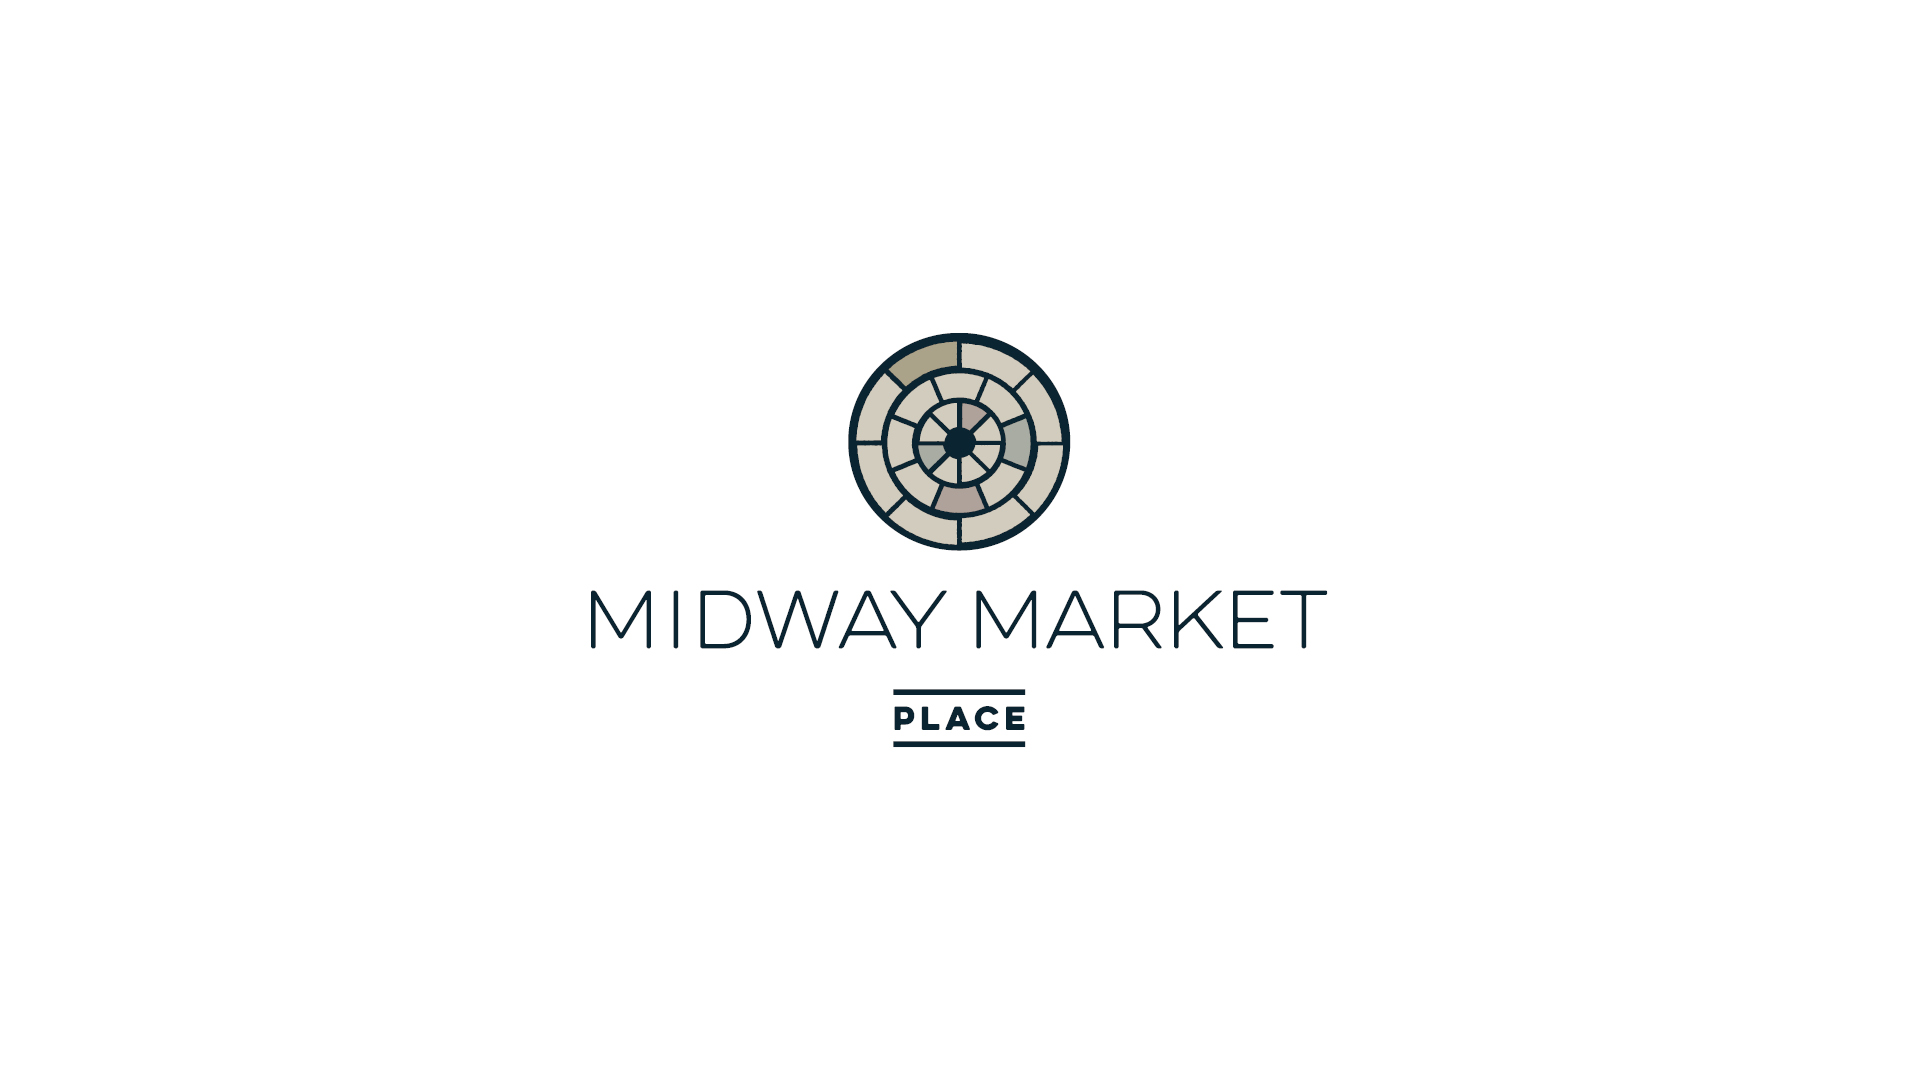 Midway Market Place Logo and Brand Design - Saunders Design Group